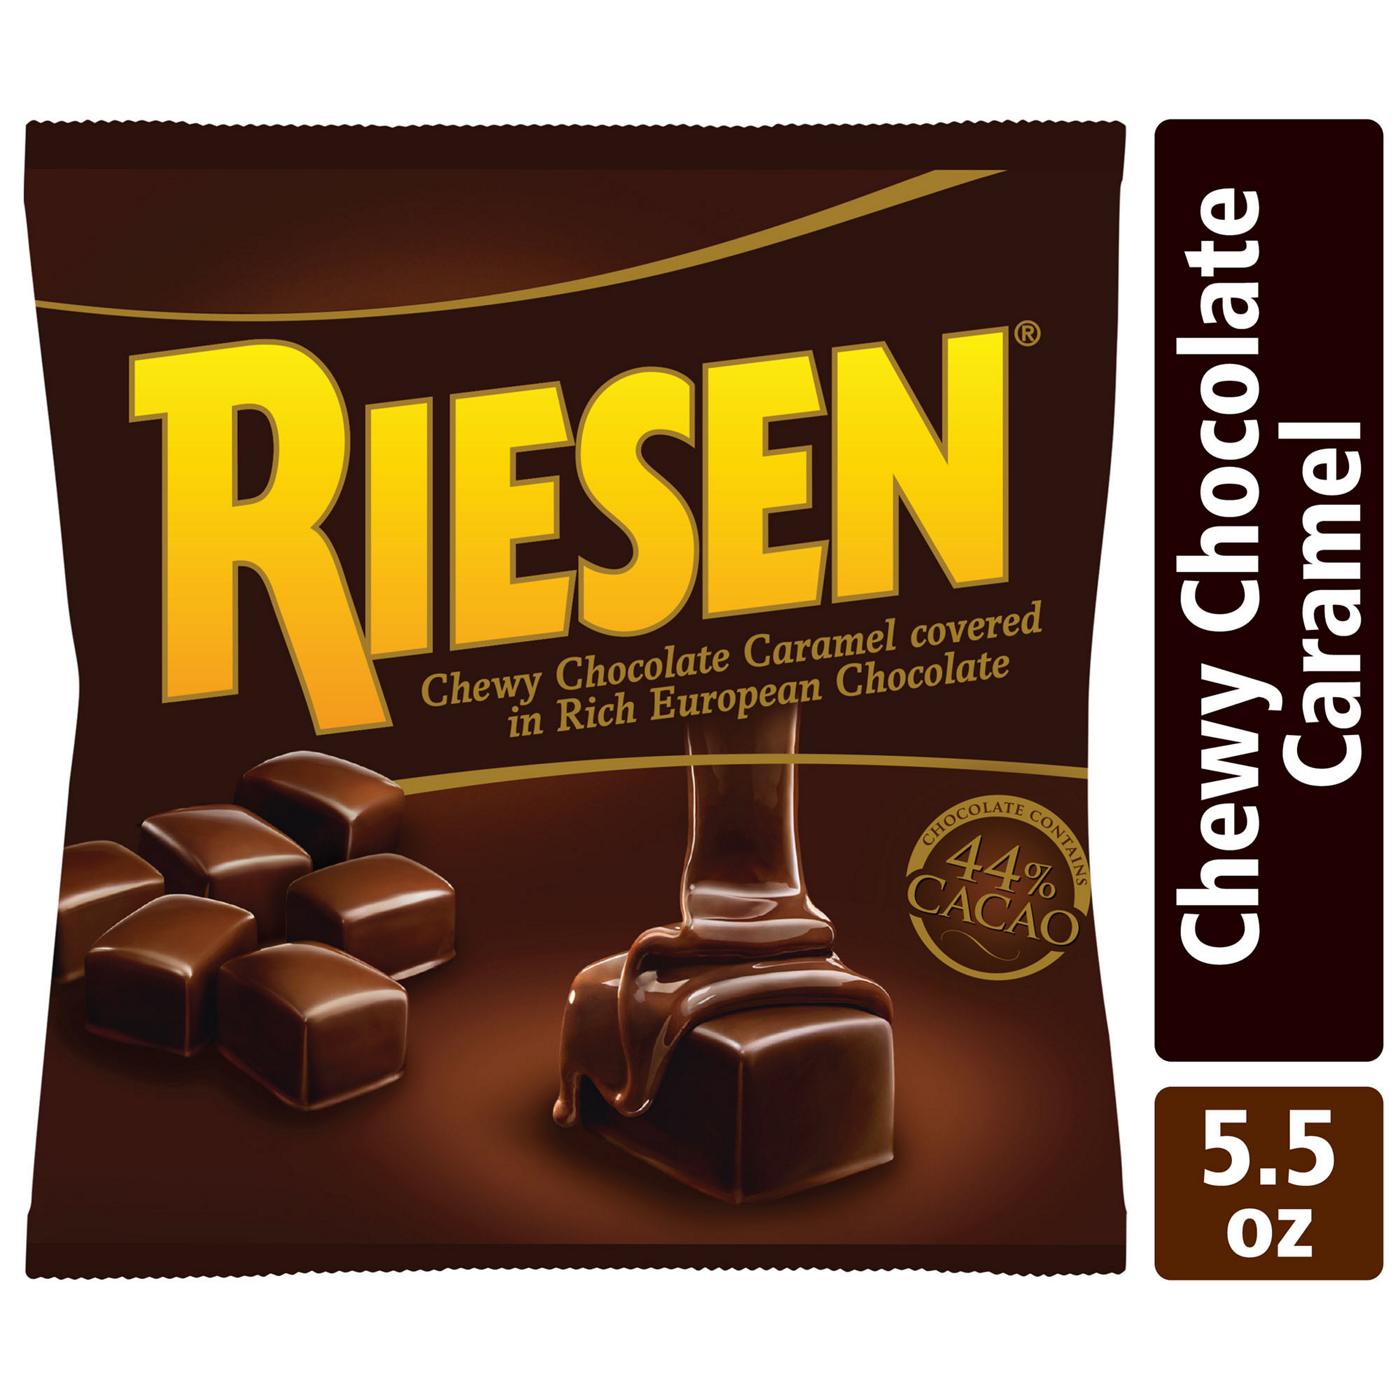 Riesen Chocolate Covered Chewy Caramel Candy; image 6 of 6